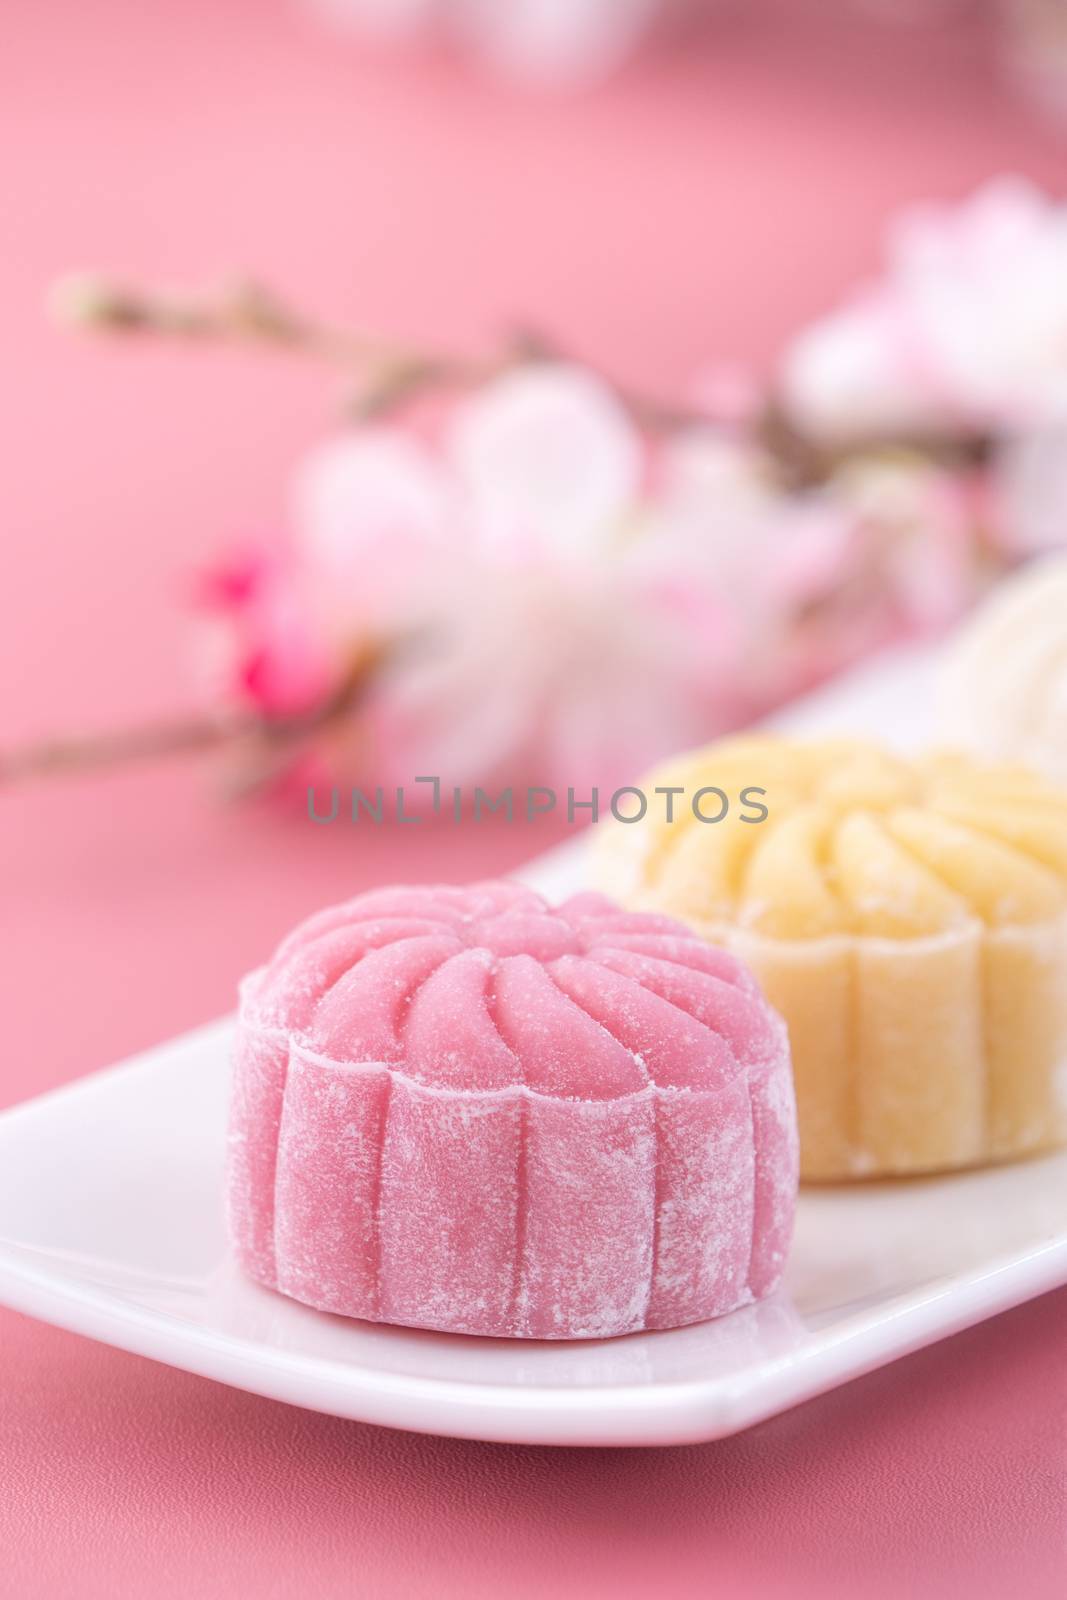 Colorful snow skin moon cake, sweet snowy mooncake, traditional savory dessert for Mid-Autumn Festival on pastel pale pink background, close up, lifestyle.